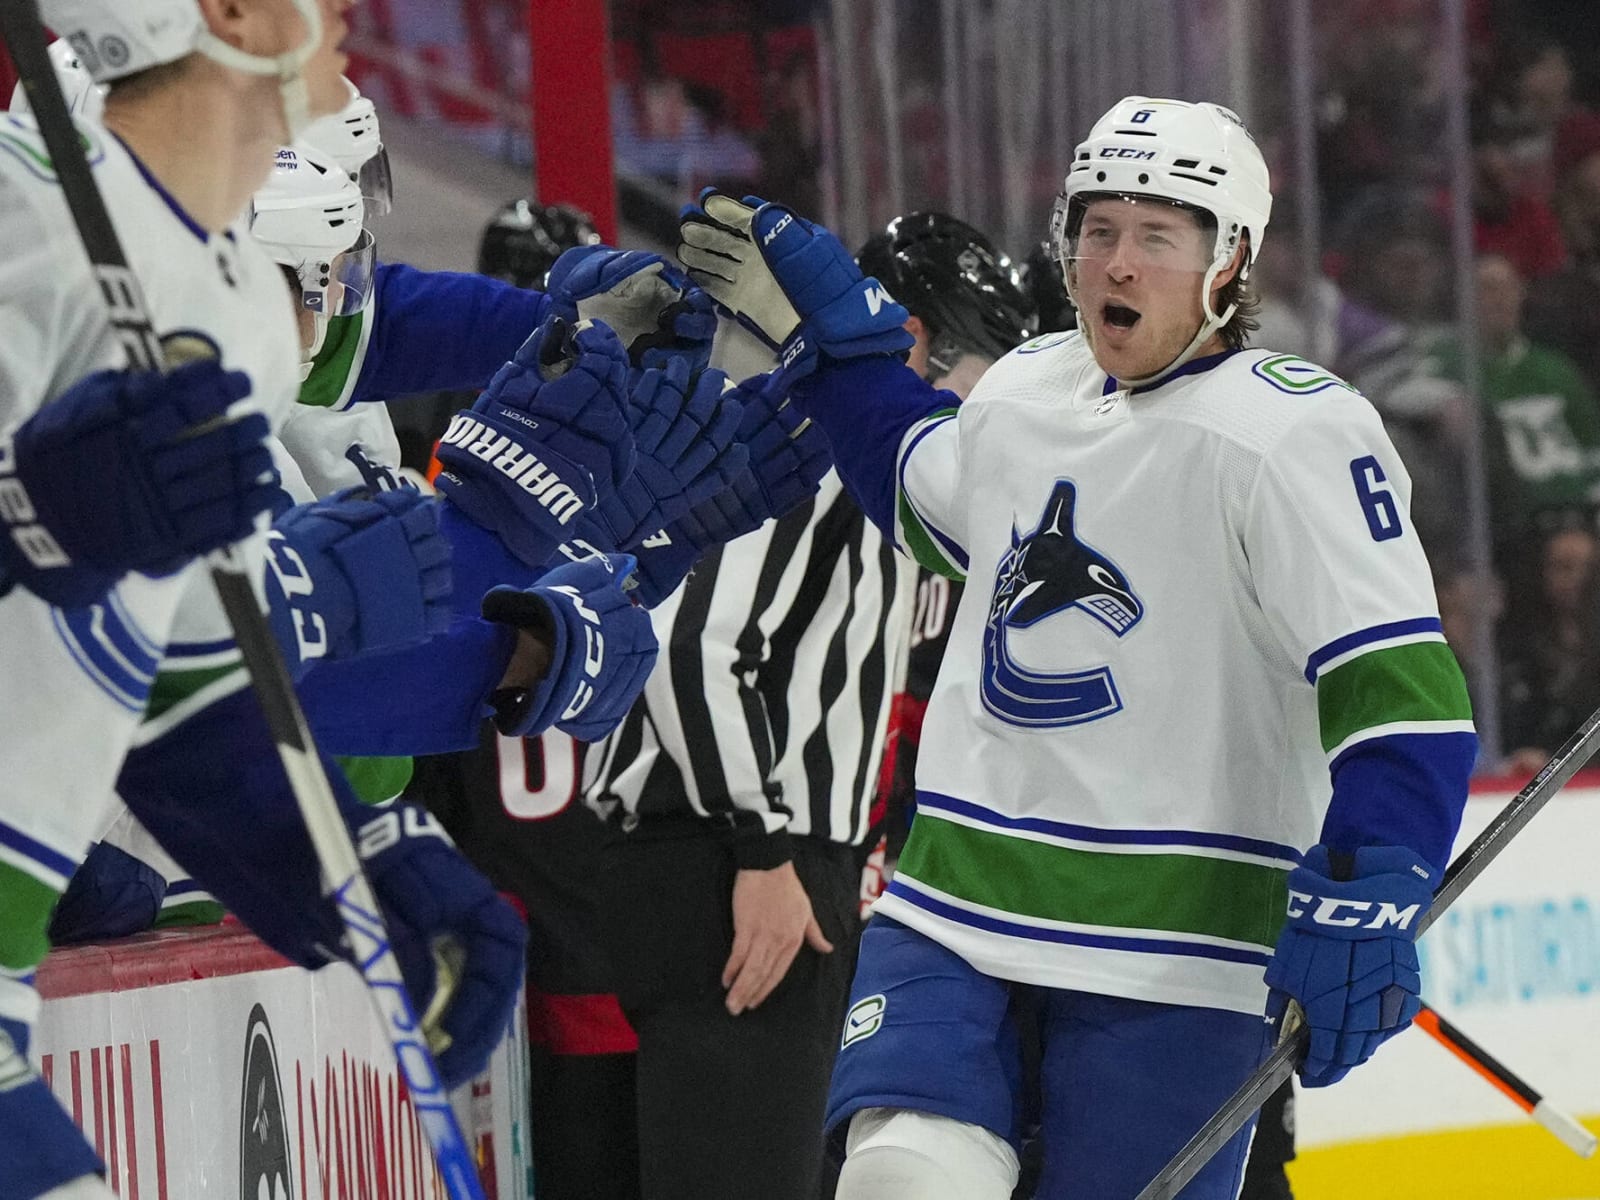 Winners and Losers of the Bo Horvat Trade to the New York